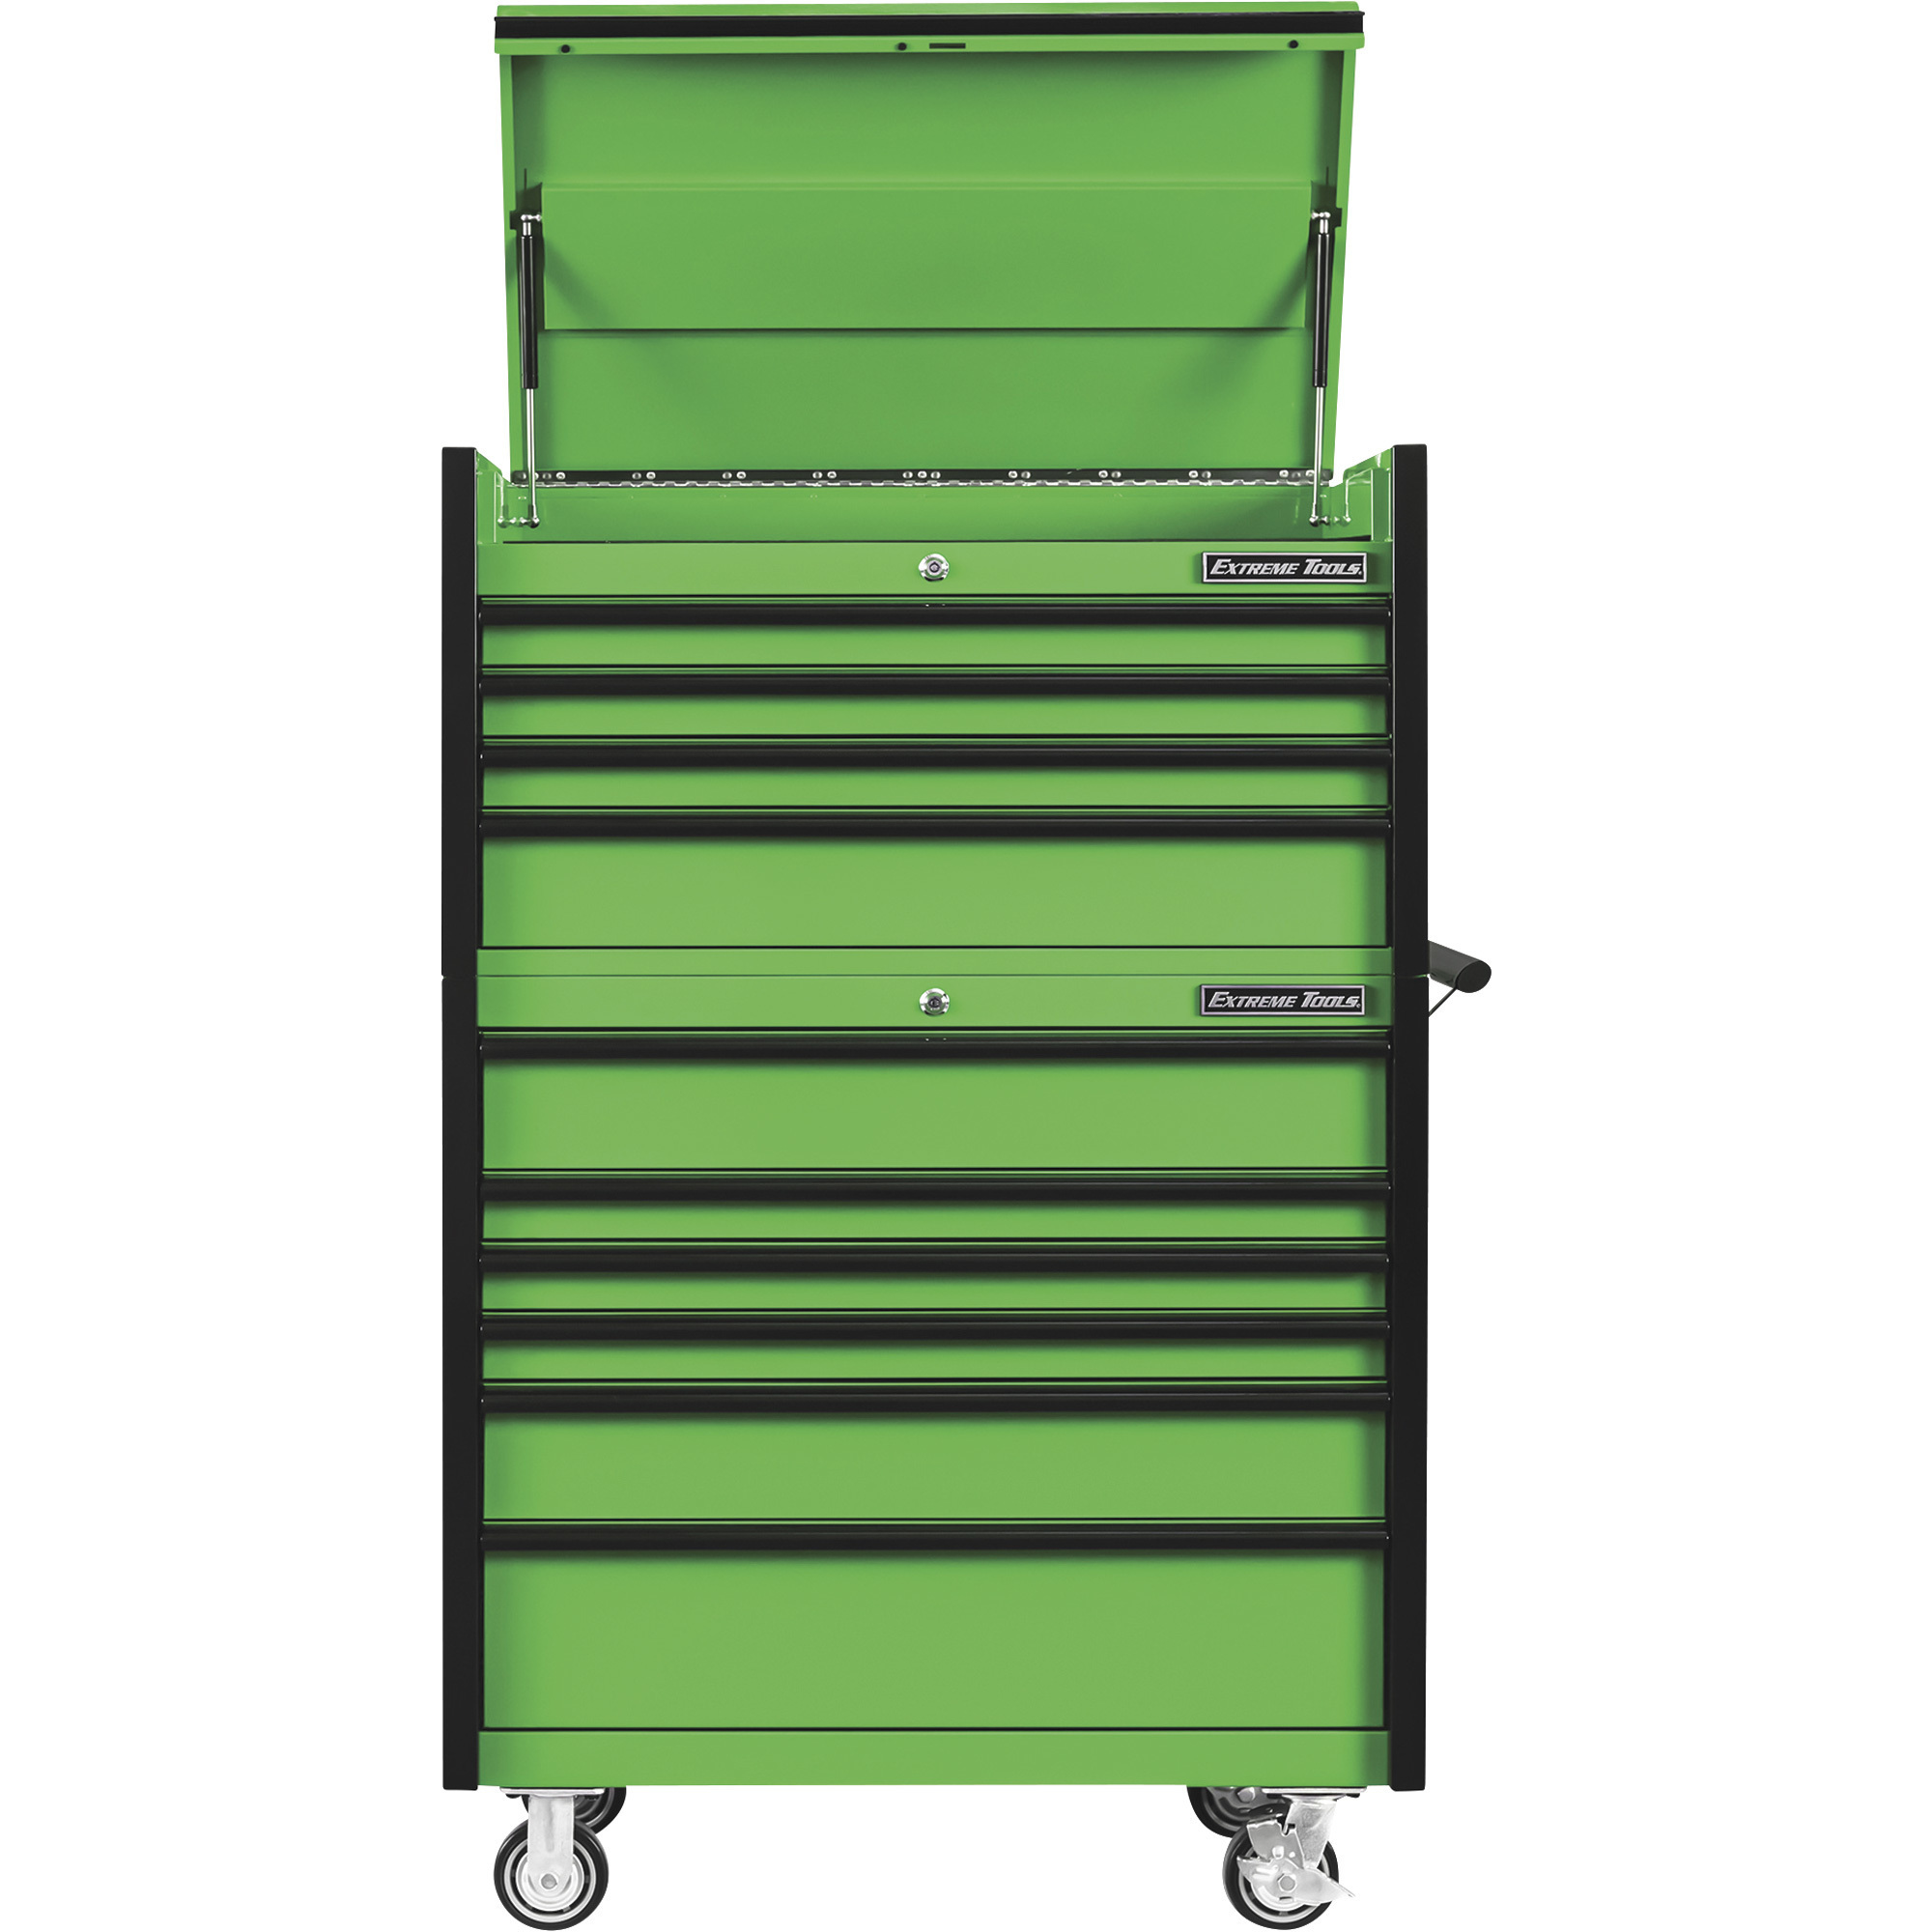 Extreme Tools 4-Drawer Top Chest/6-Drawer Roller Cabinet Combo â 41Inch W x 25Inch D x 64Inch H, Green/Black, Model DX4110CRGK